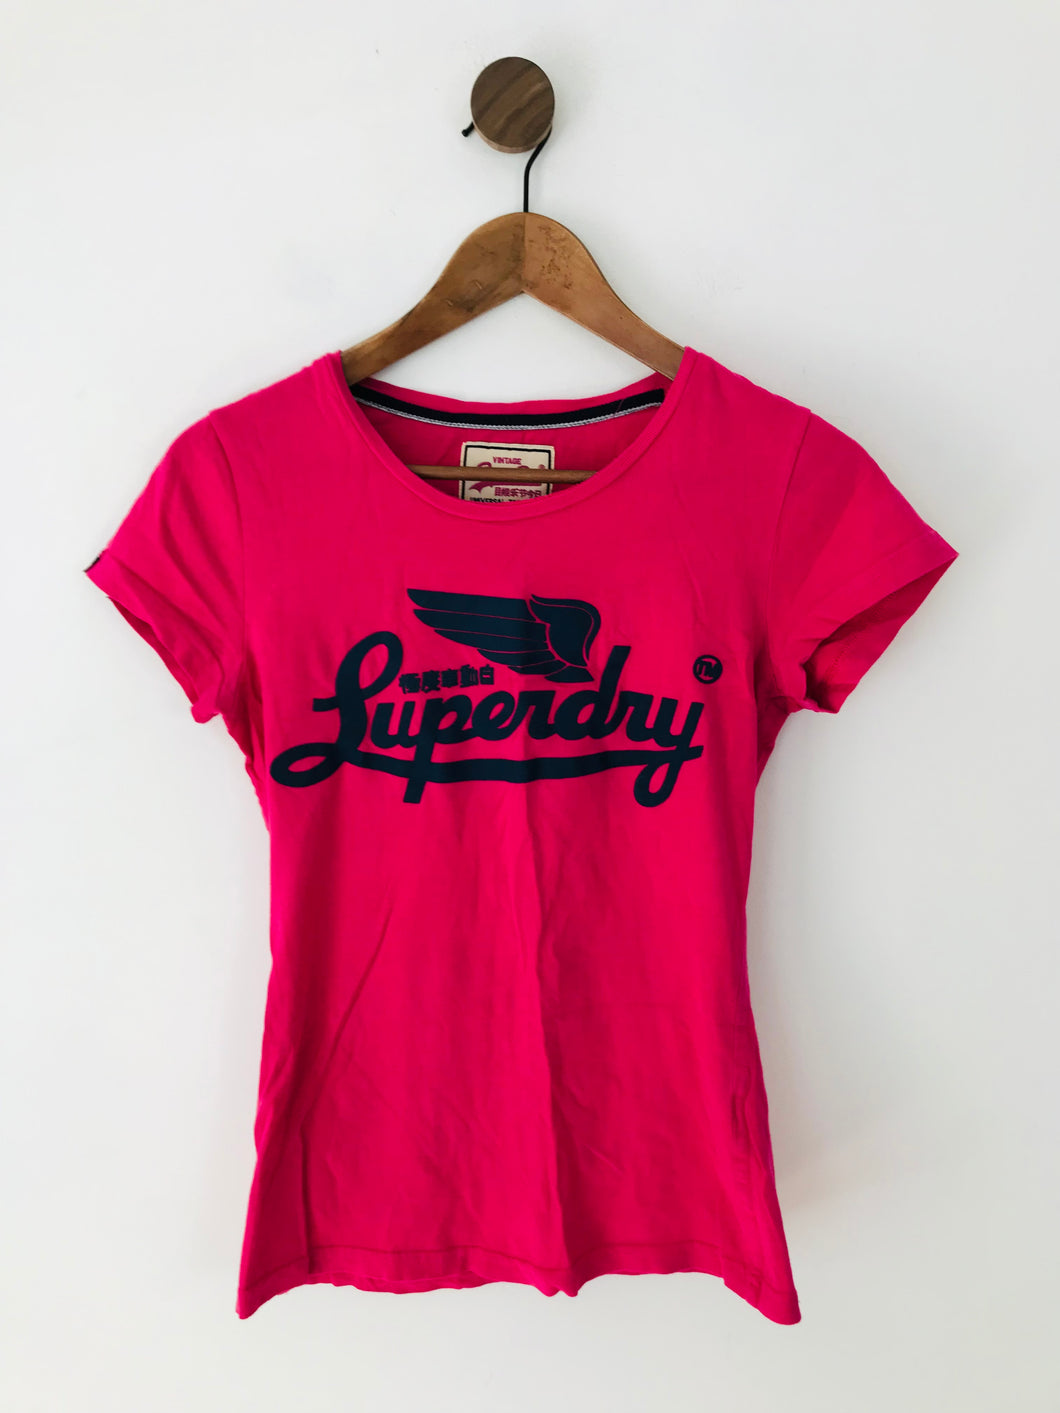 Superdry Women's Cotton Fitted Graphic Logo T-Shirt | S UK8 | Pink